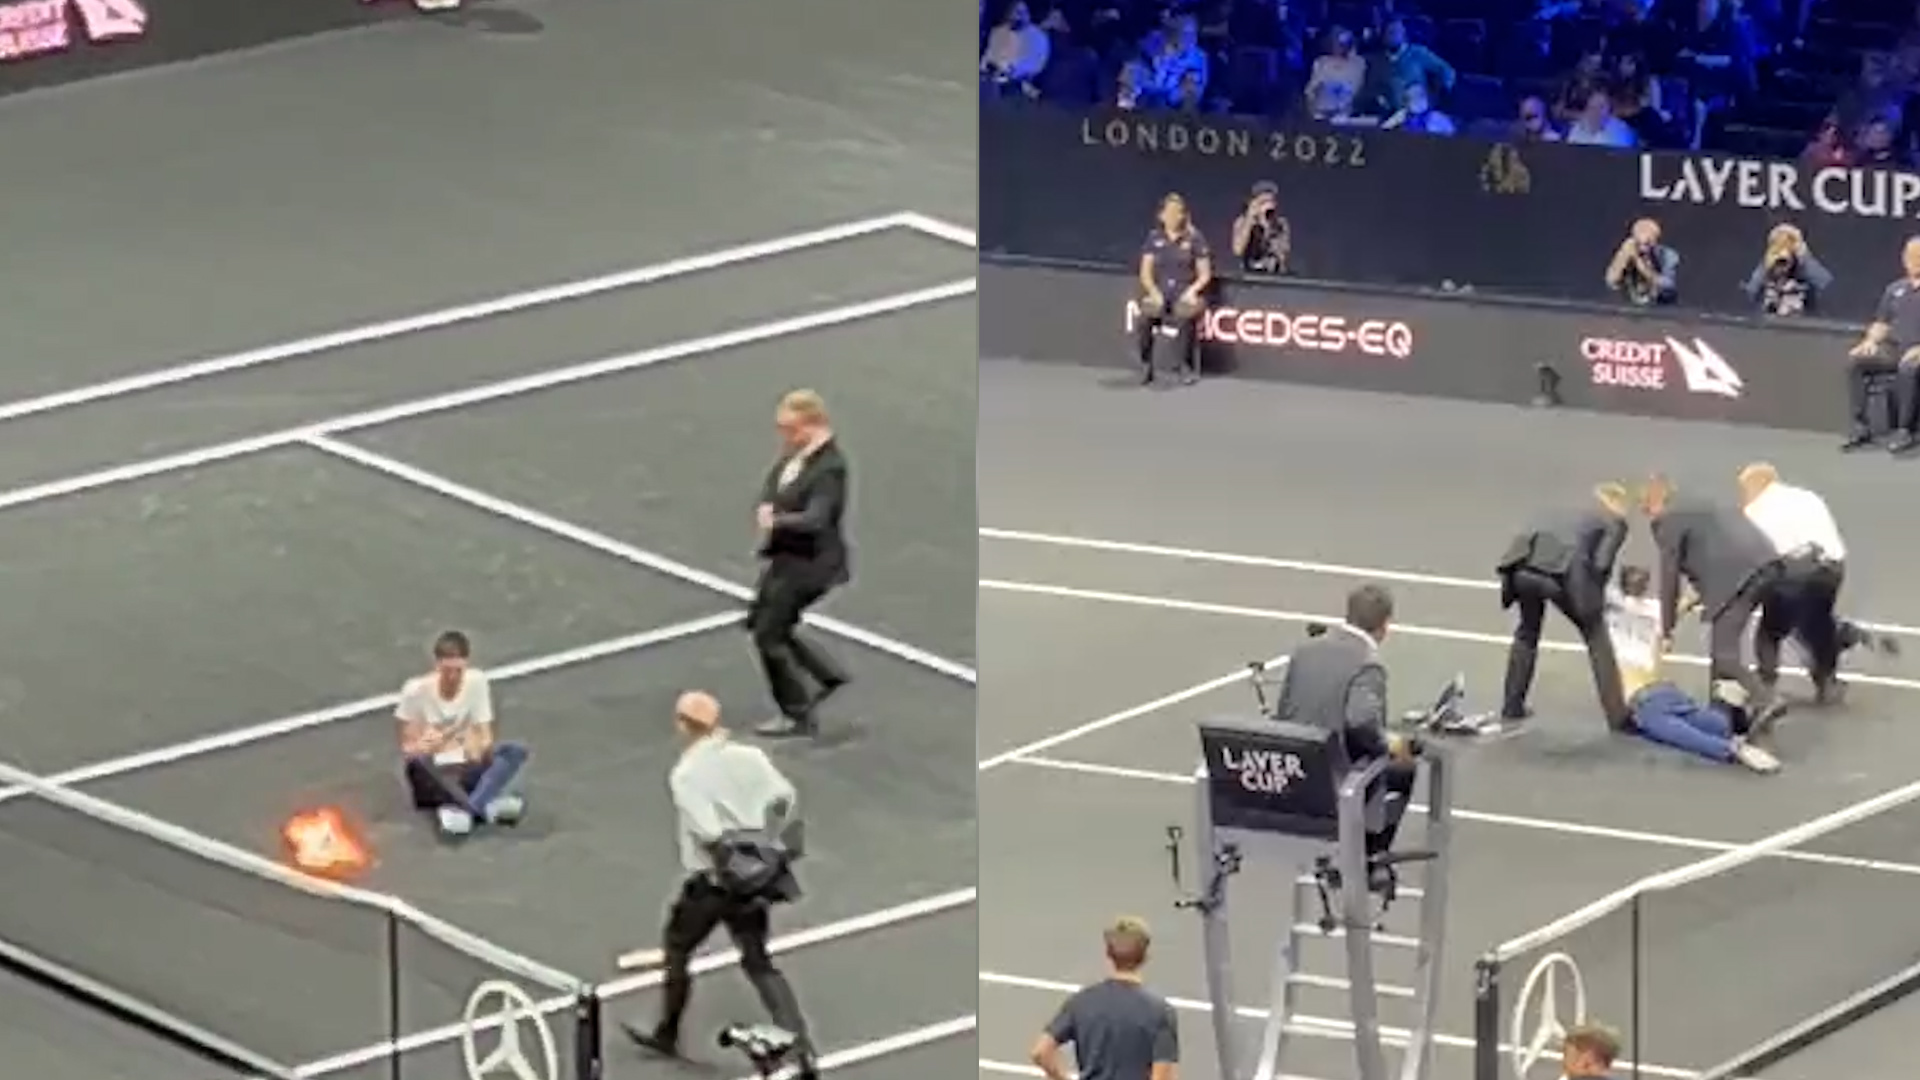 Activist sets himself on fire at Laver cup on day of Federer's last ever match